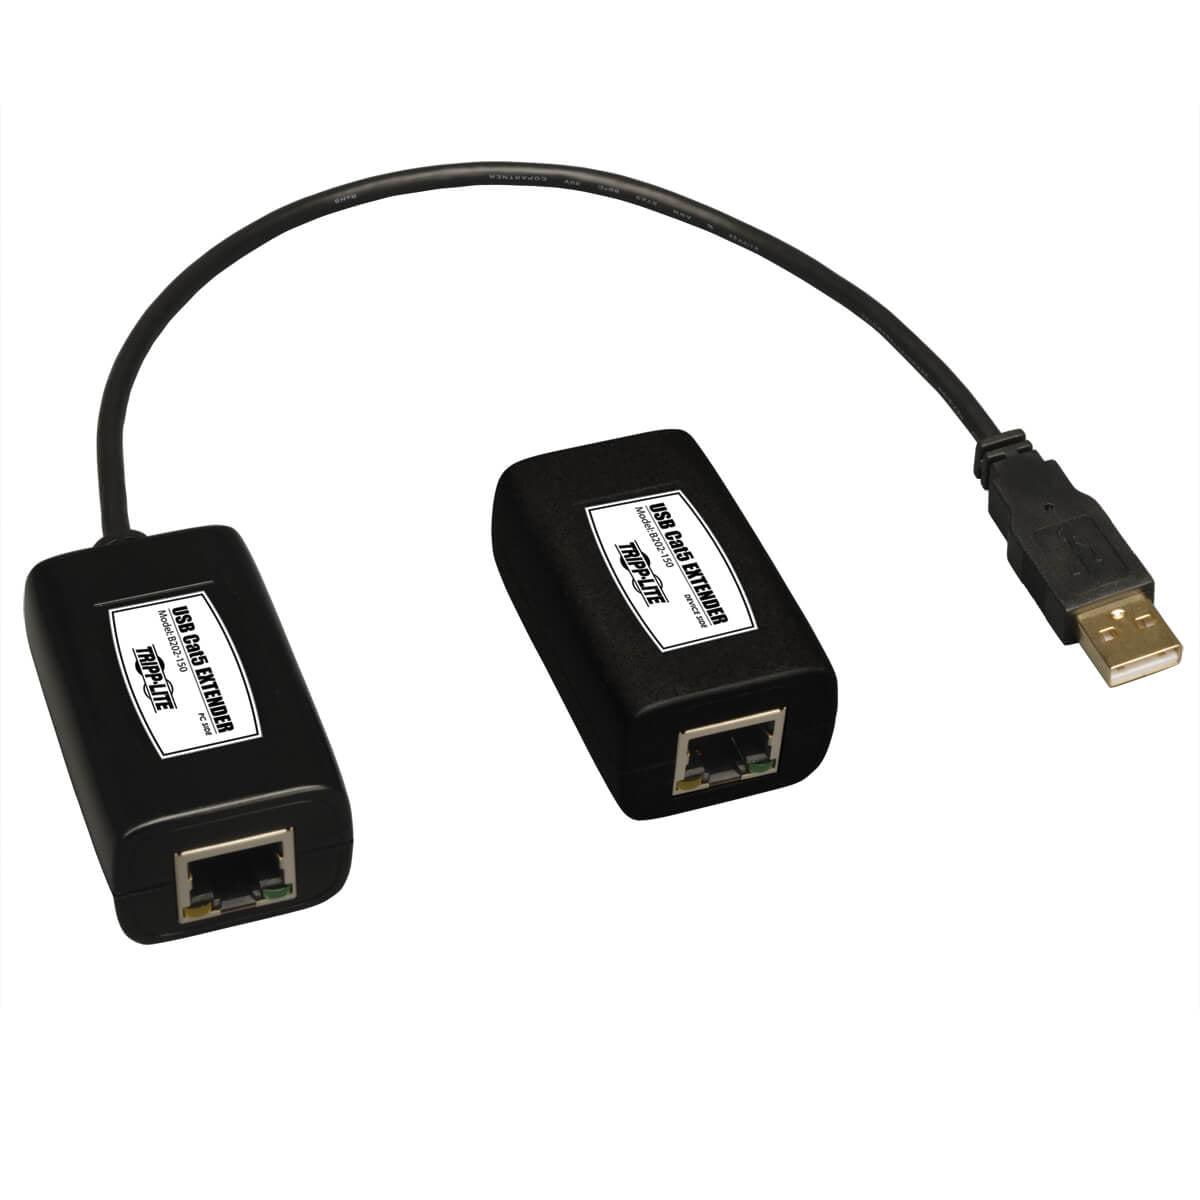 Tripp Lite B202-150 1-Port Usb Over Cat5/Cat6 Extender, Transmitter And Receiver, Up To 150 Ft. (45.72 M), Taa